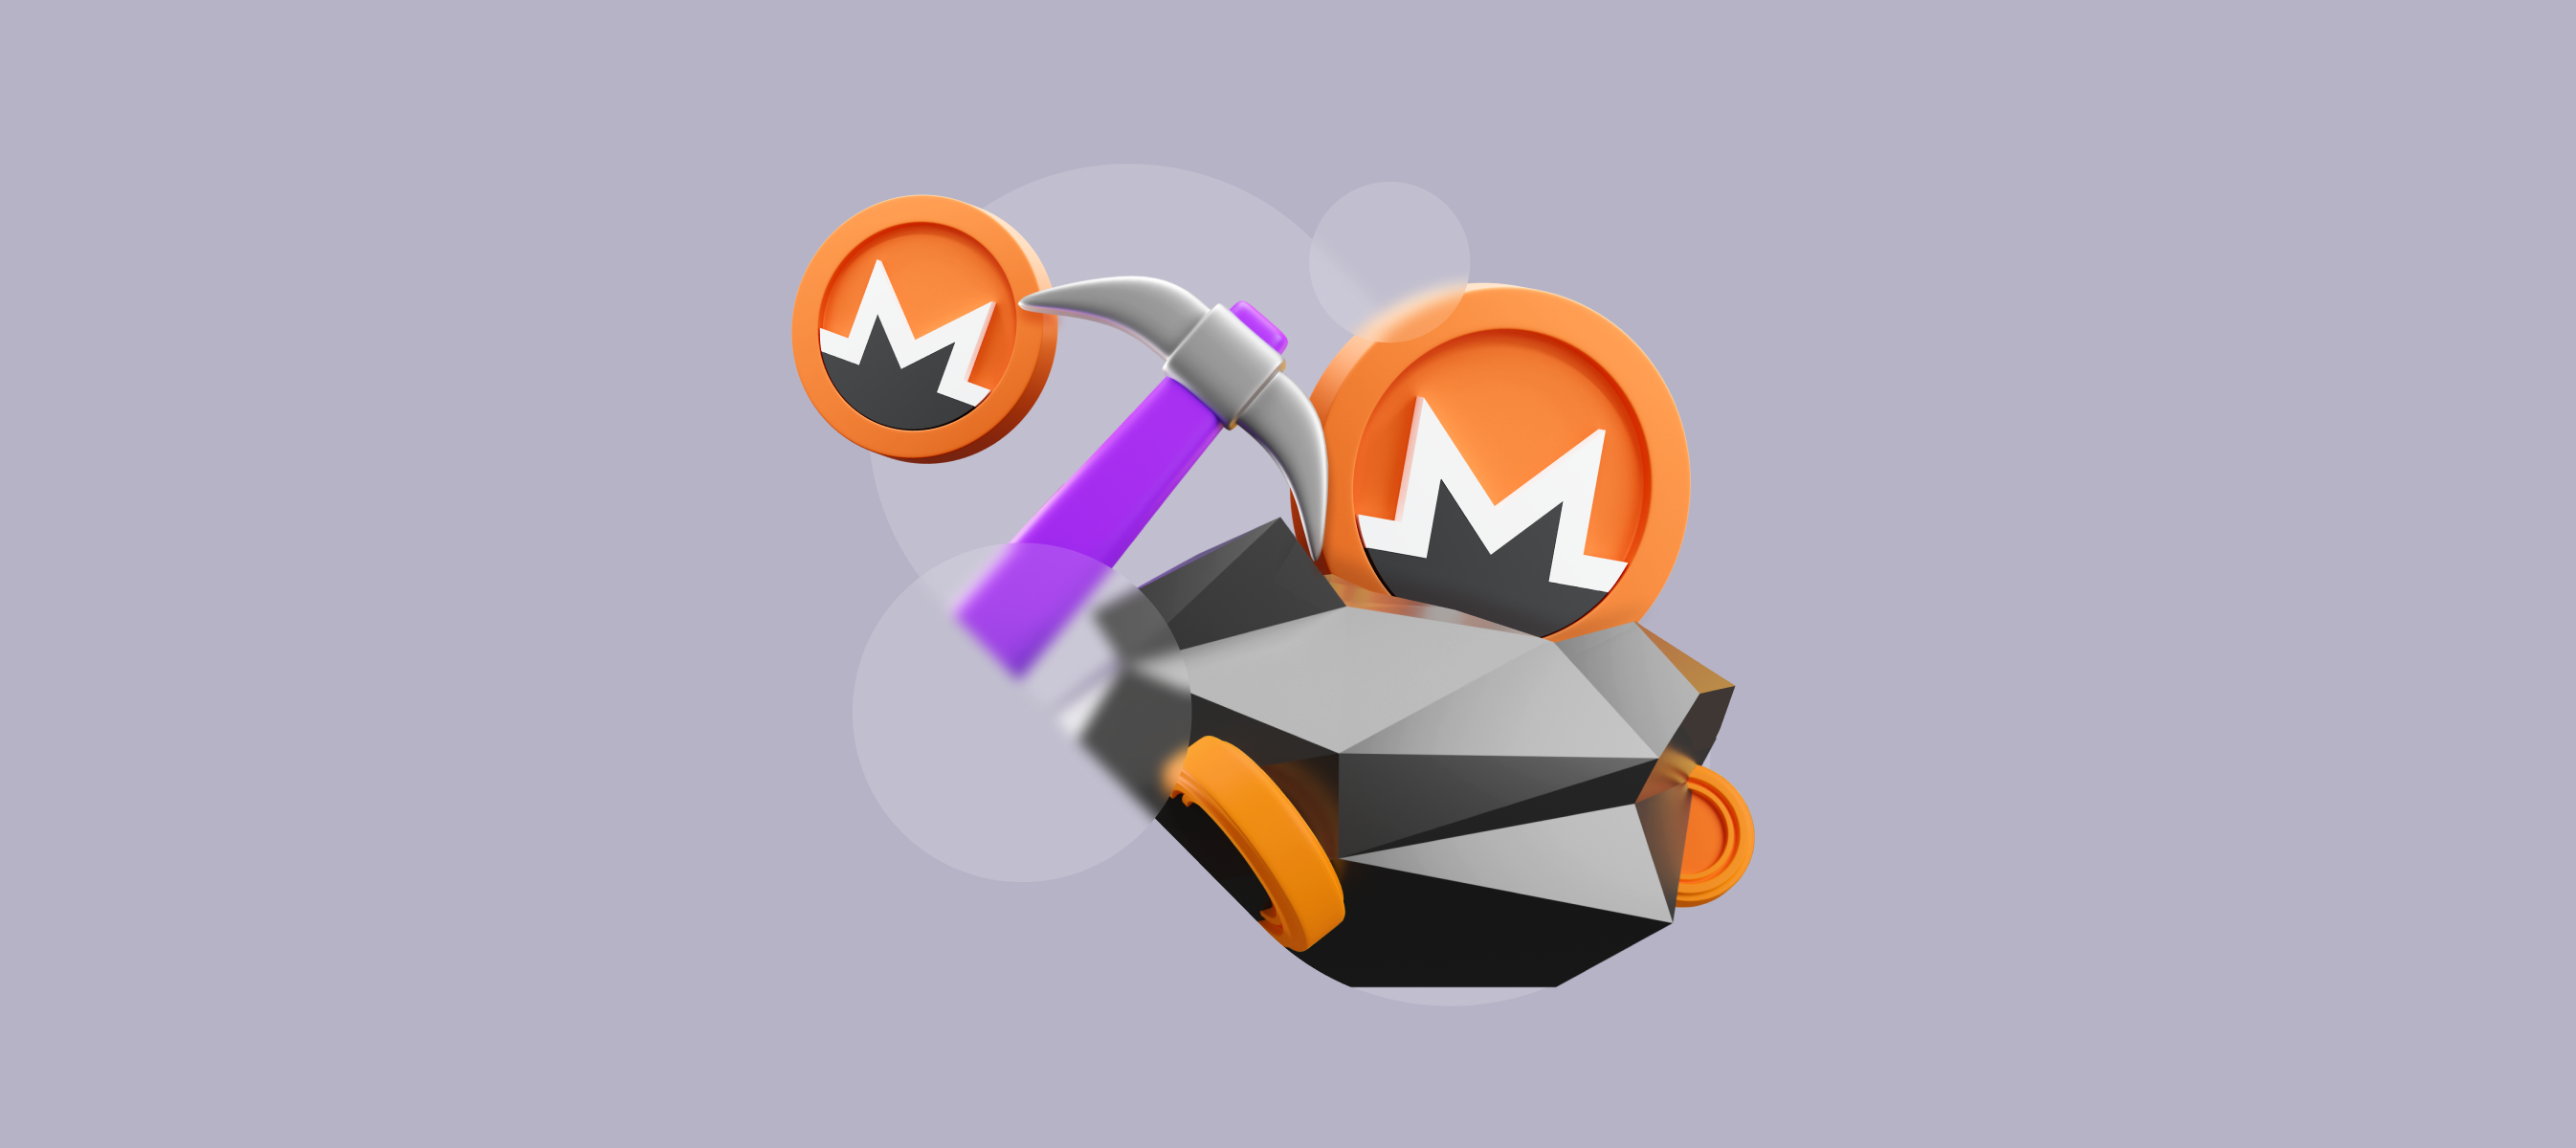 What is Monero (XMR) mining and how does it work?